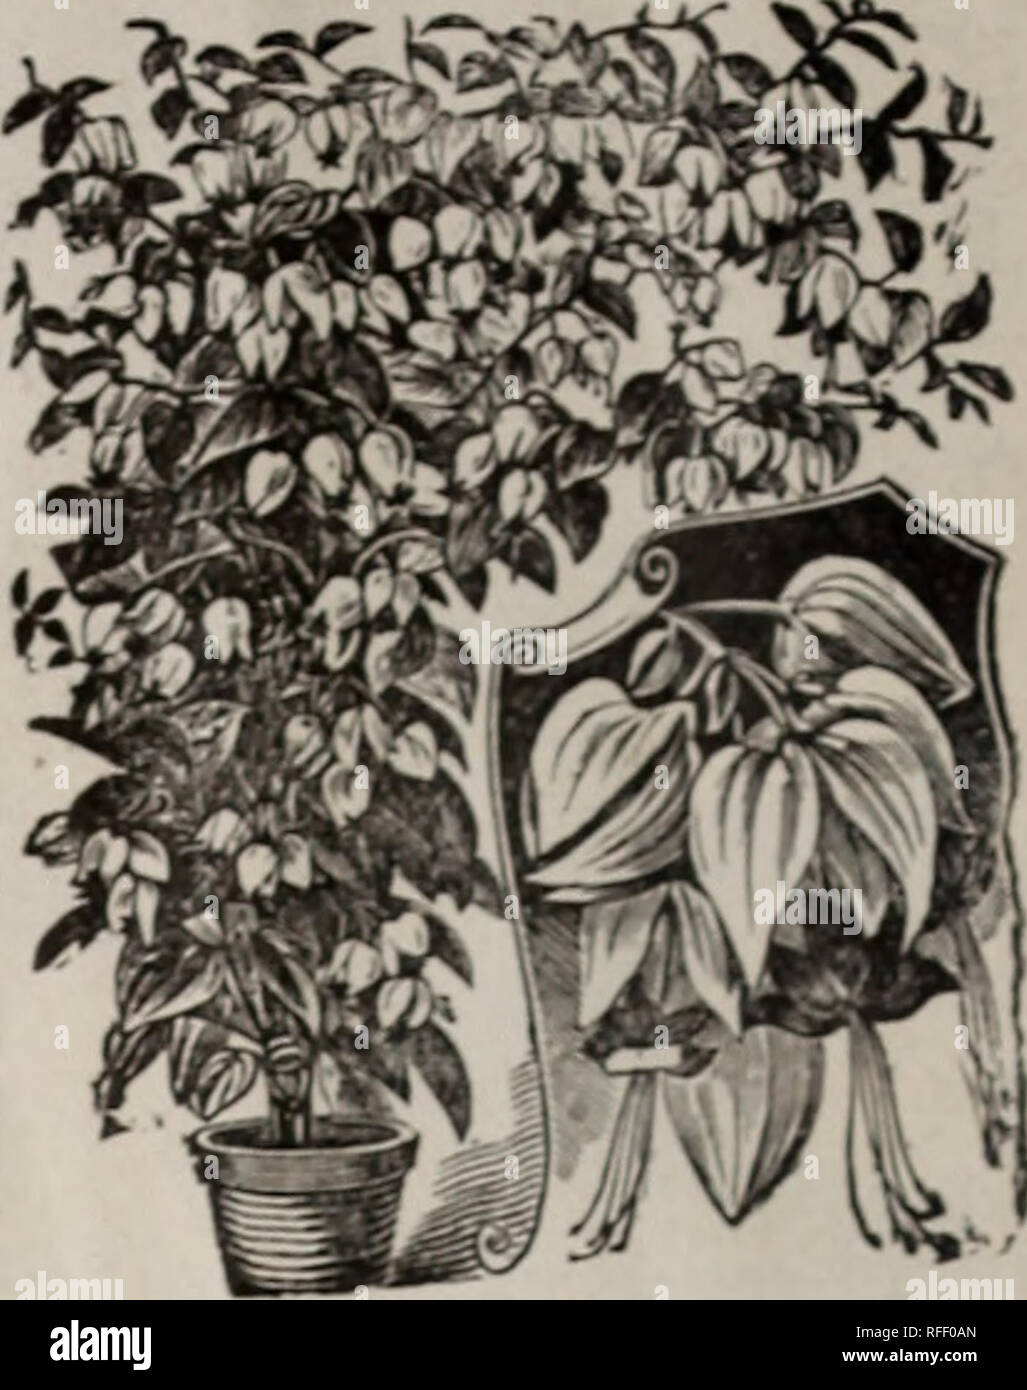 . 1902 trade list. Nursery stock Ohio Catalogs; Plants, Ornamental Catalogs; Roses Catalogs; Flowers Catalogs; Bulbs (Plants) Catalogs. CrotonS Clerodendron Balfourii. The Crotons are among the finest decorative foliage plants known. As easy to grow as Coleus. an&lt;l much briKhter in their cohiring. Our customers everywhere, especially in the South, should ht'd «nit Crotons. The leaves of all are more or less veinc«l and margined, some- times entirely varit't?ated with shadesofyellow orange aii&lt;l crimson. Some have il. narrow leaves, arching f,'ra(ffully,fountain fashion; others are broad  Stock Photo